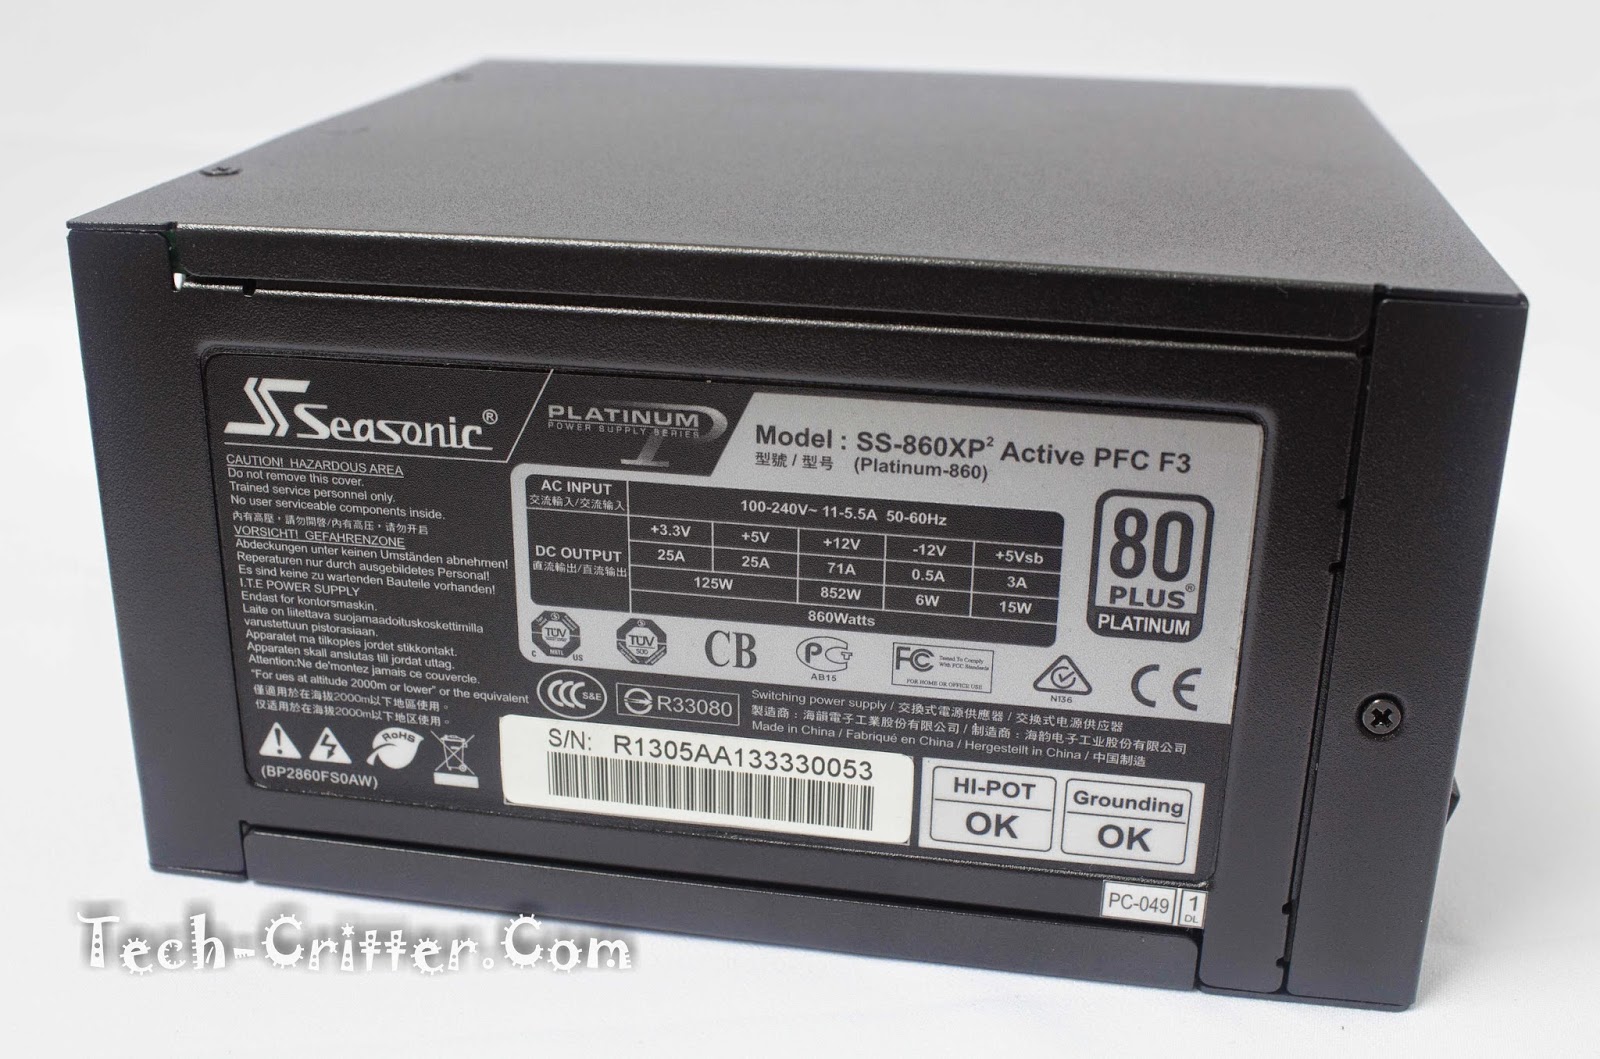 Unboxing & Overview: Seasonic Platinum Series 860W Power Supply Unit 64